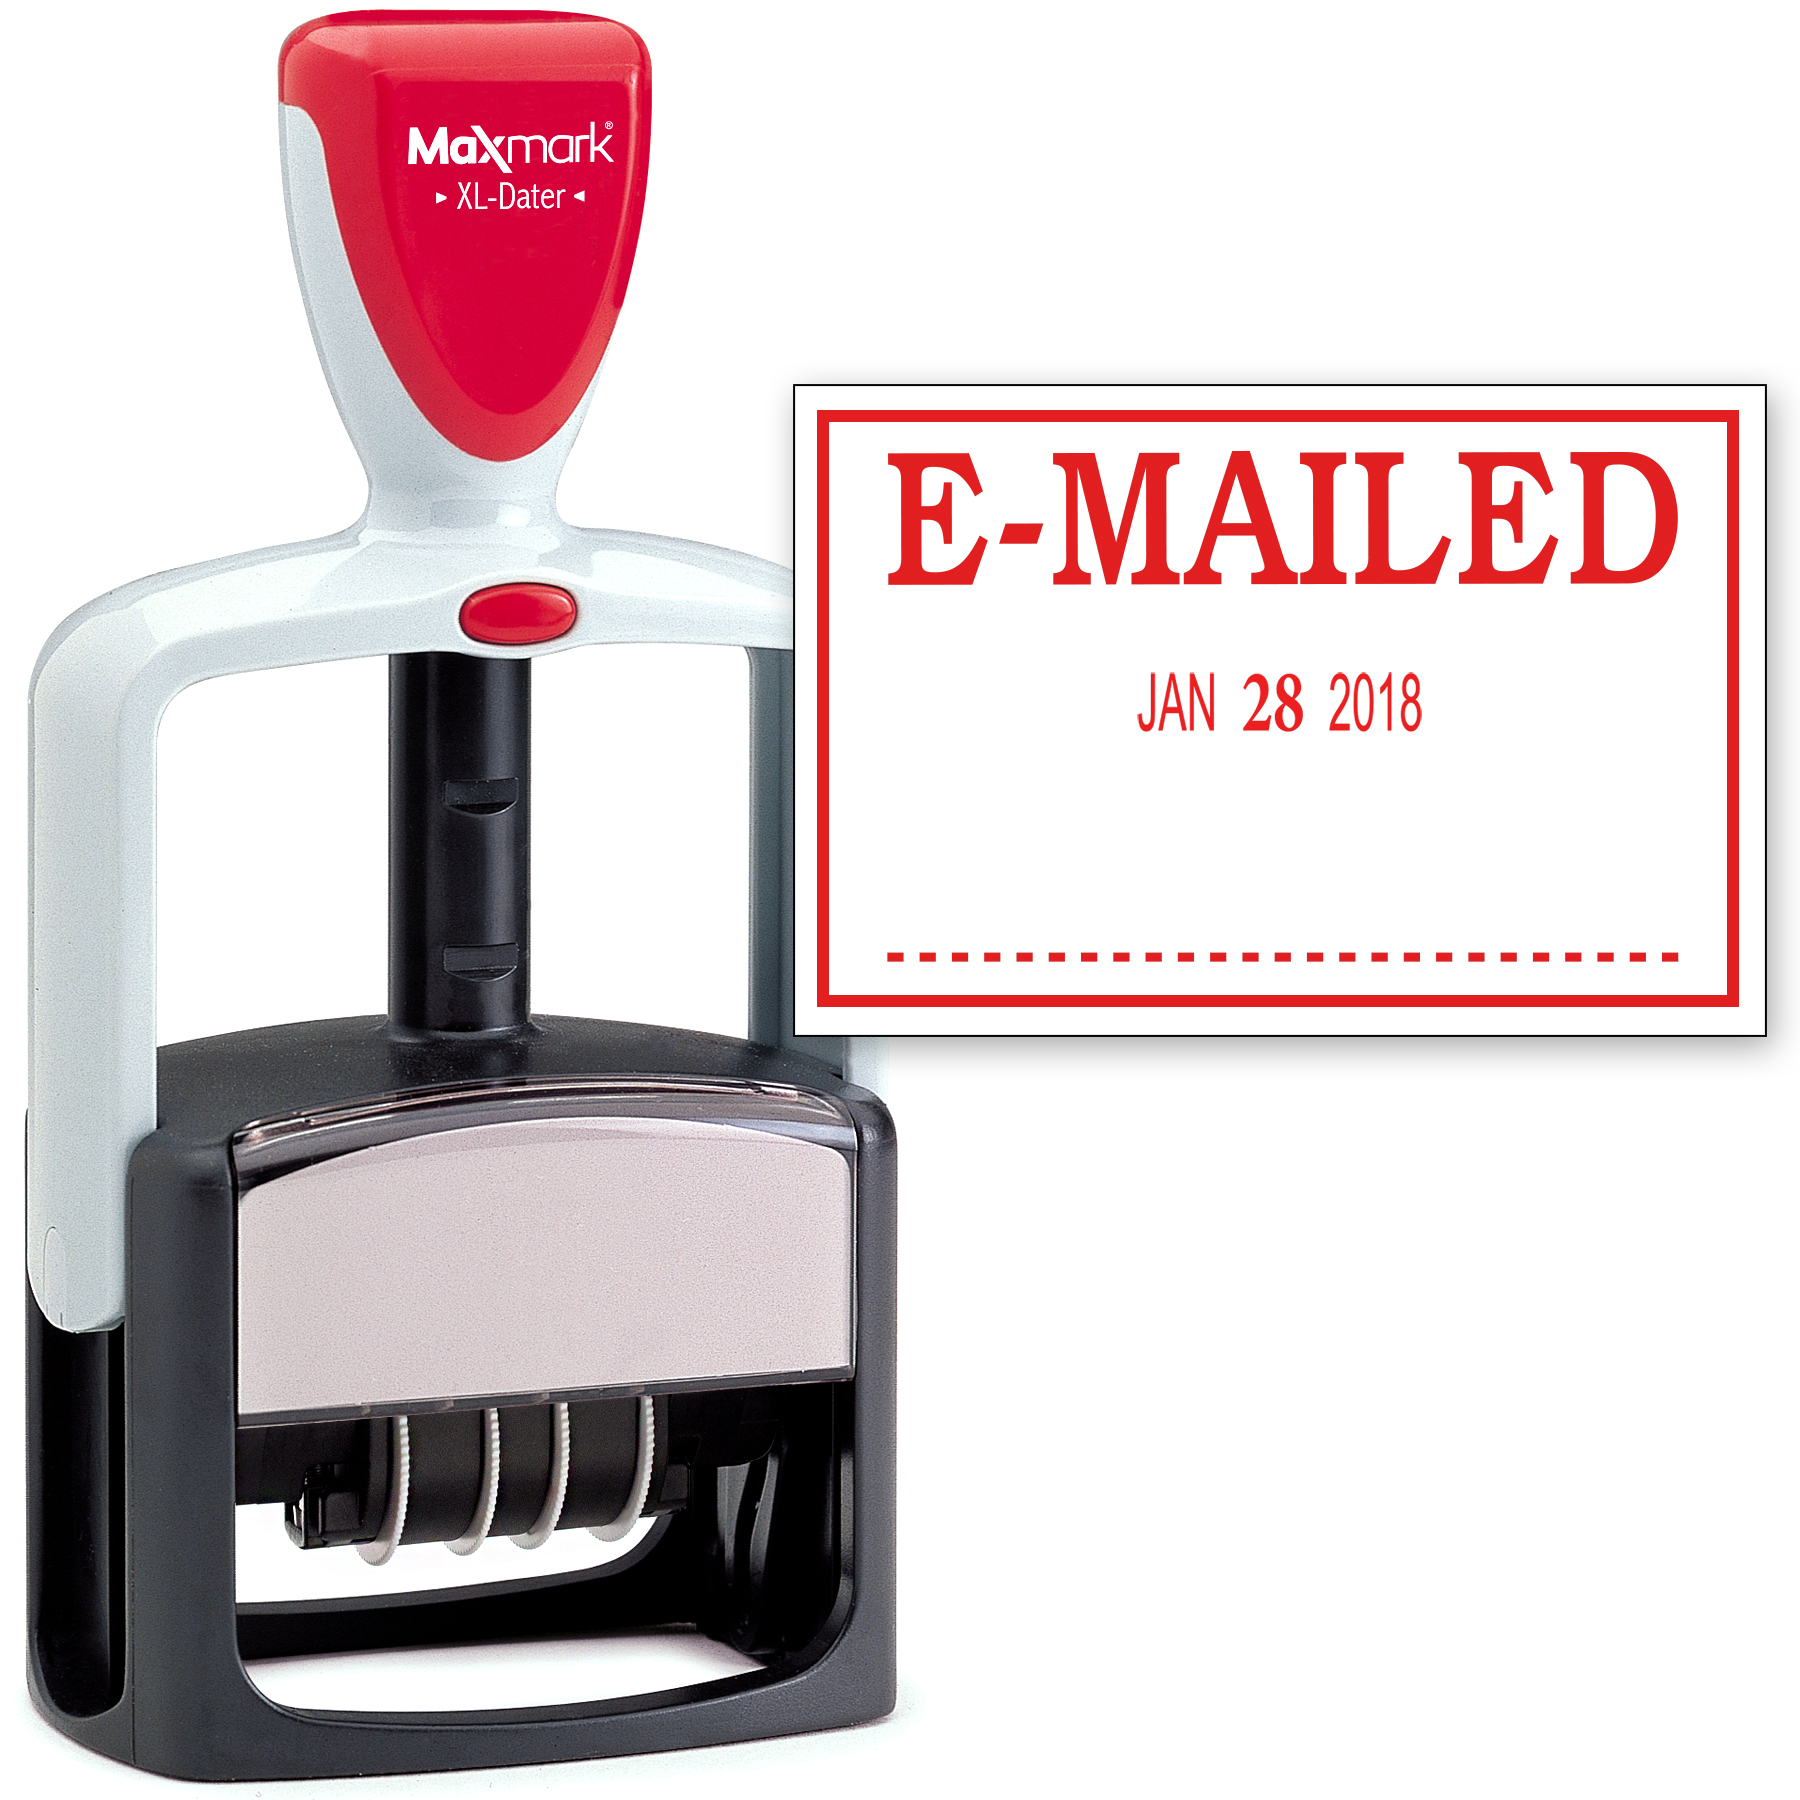 2000 PLUS Heavy Duty Style 2-Color Date Stamp with E-MAILED self inking stamp - Red Ink